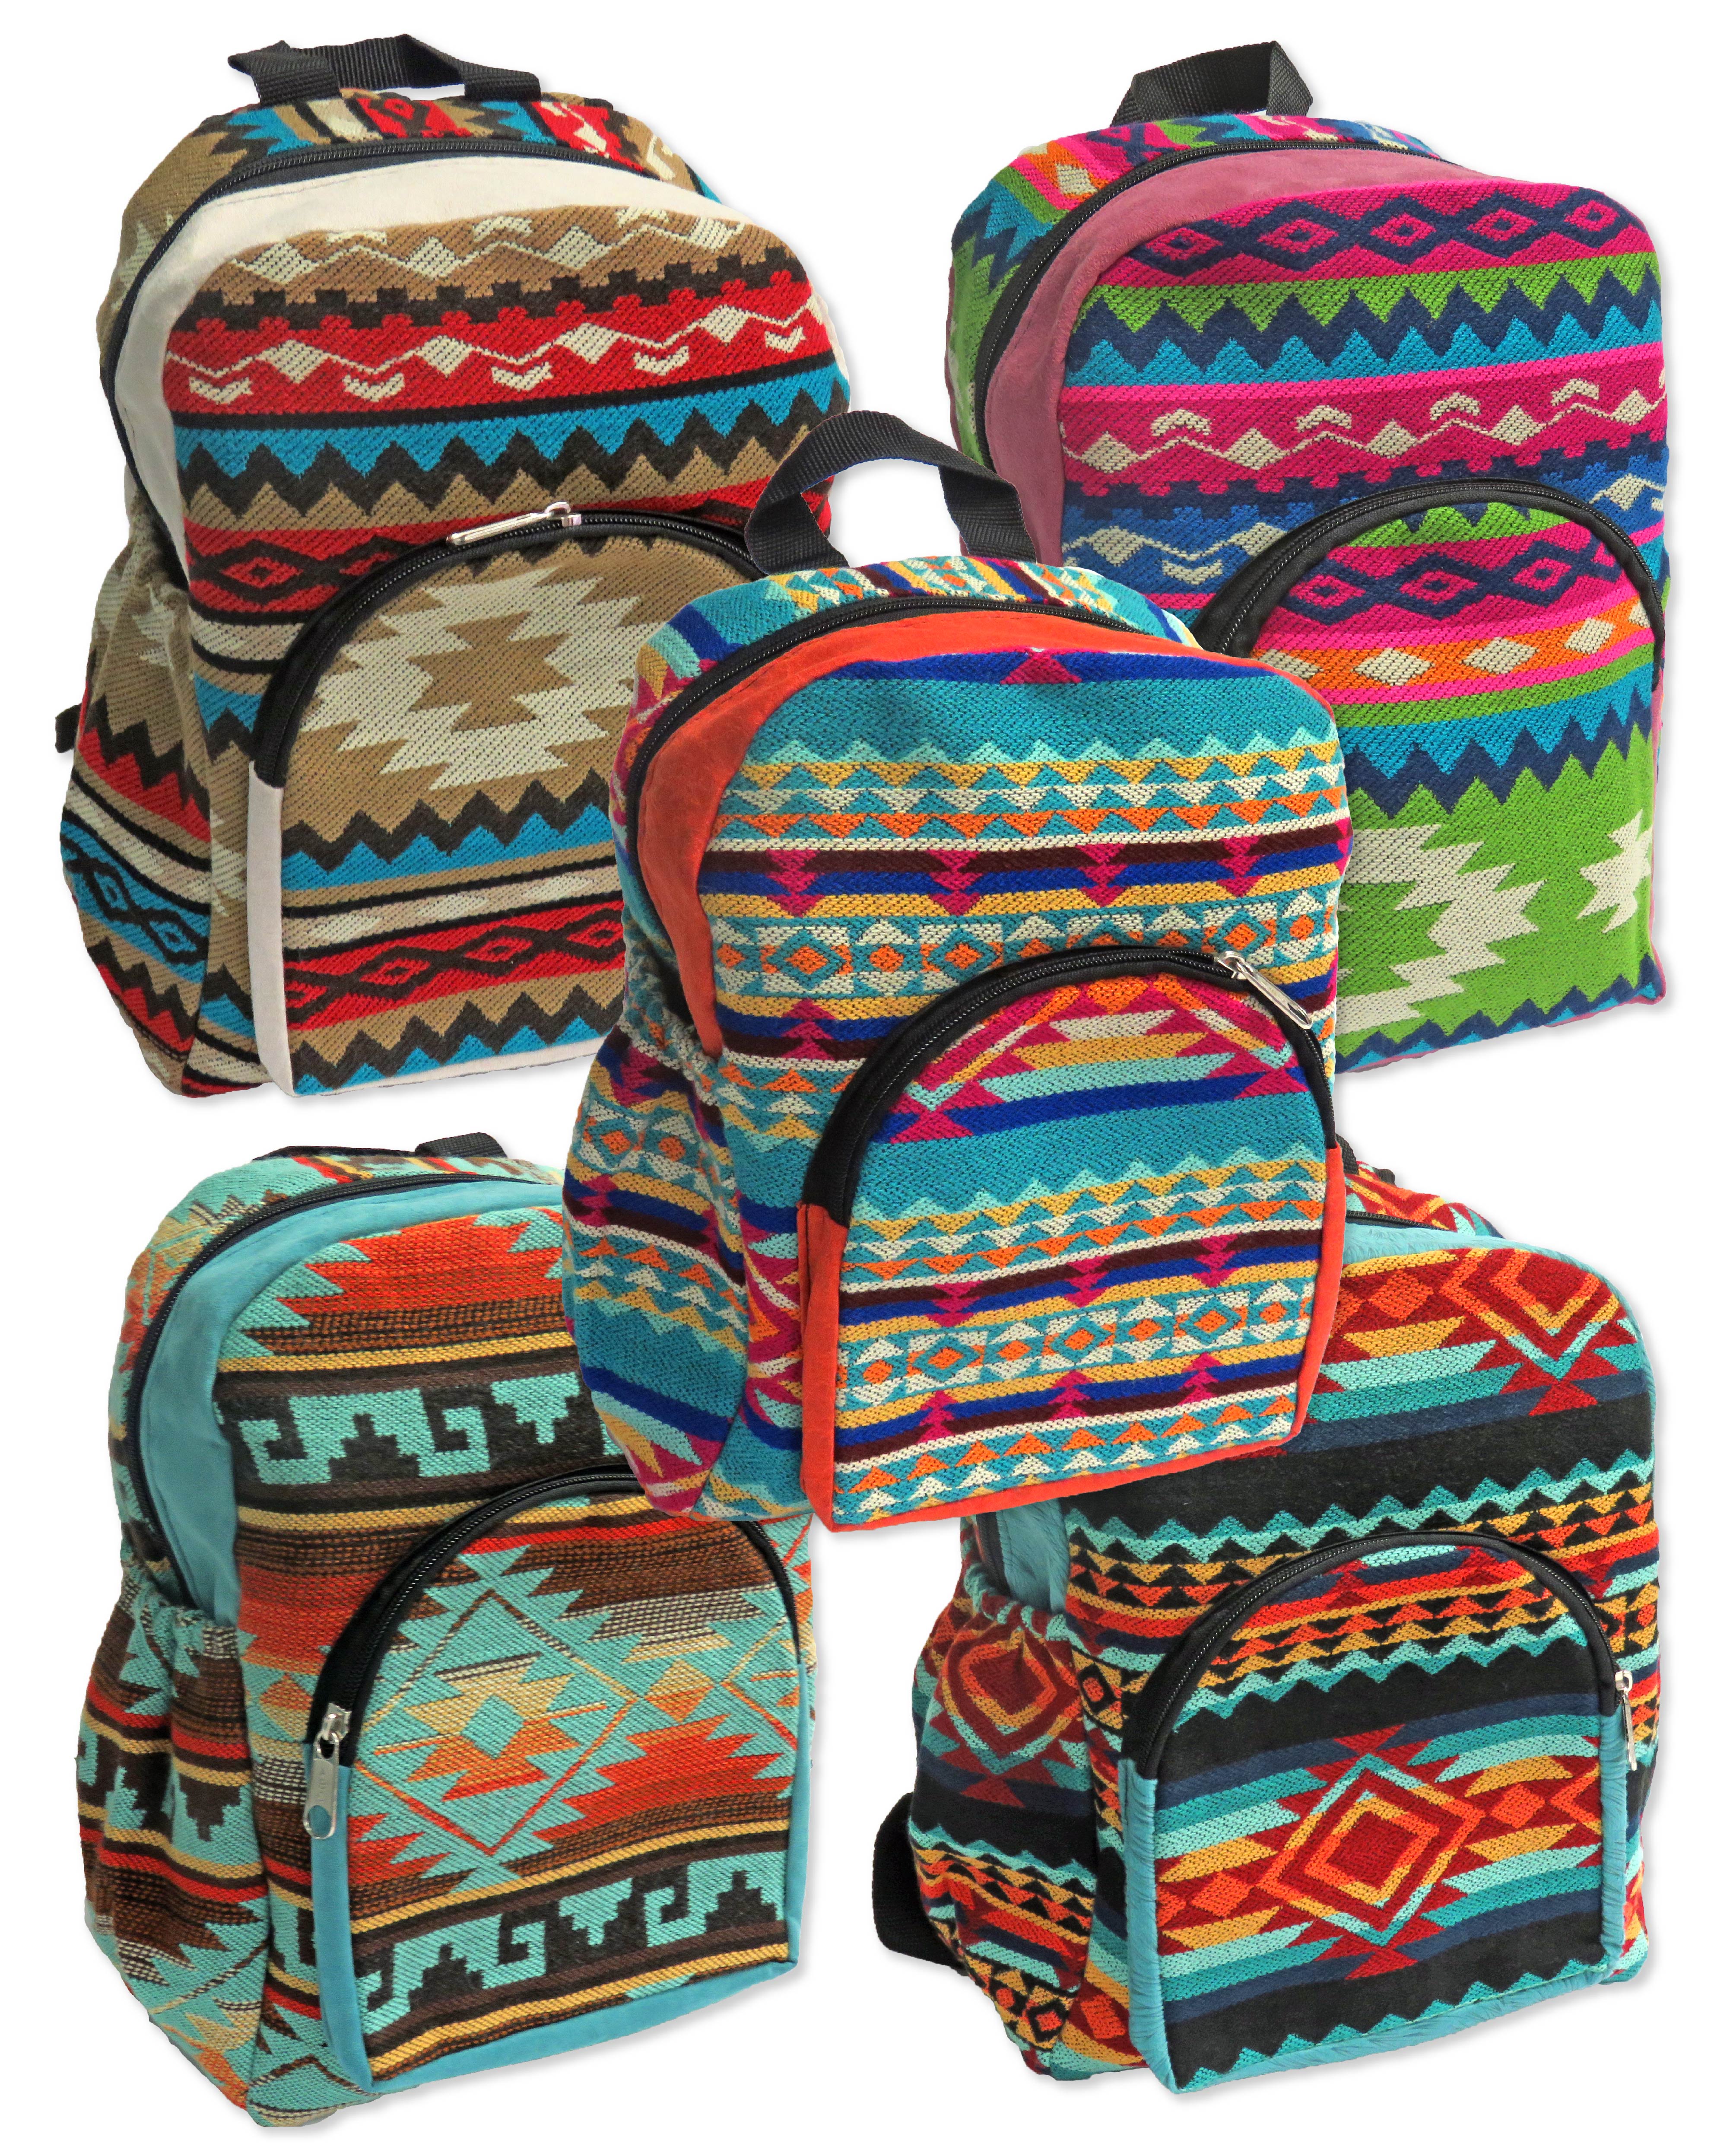 3 Youth-Size BACKPACKs! Only $18.25 ea.!